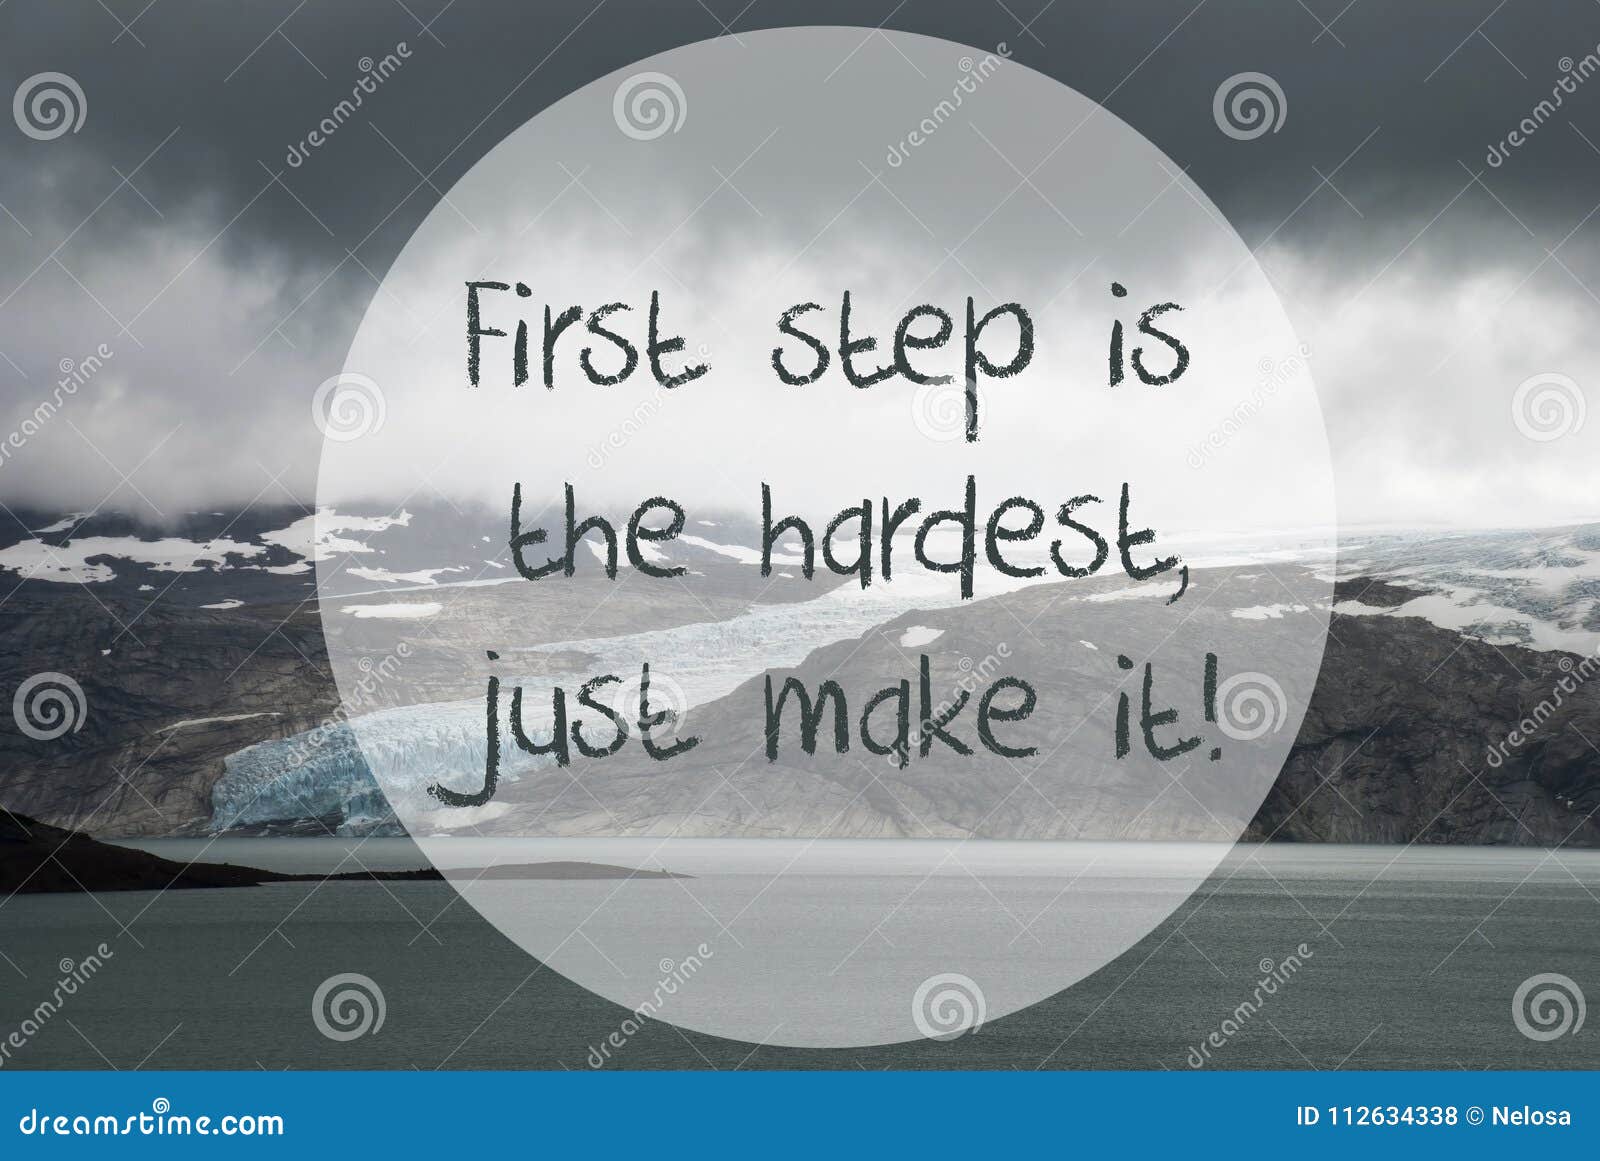 glacier, lake, quote first step is the hardest